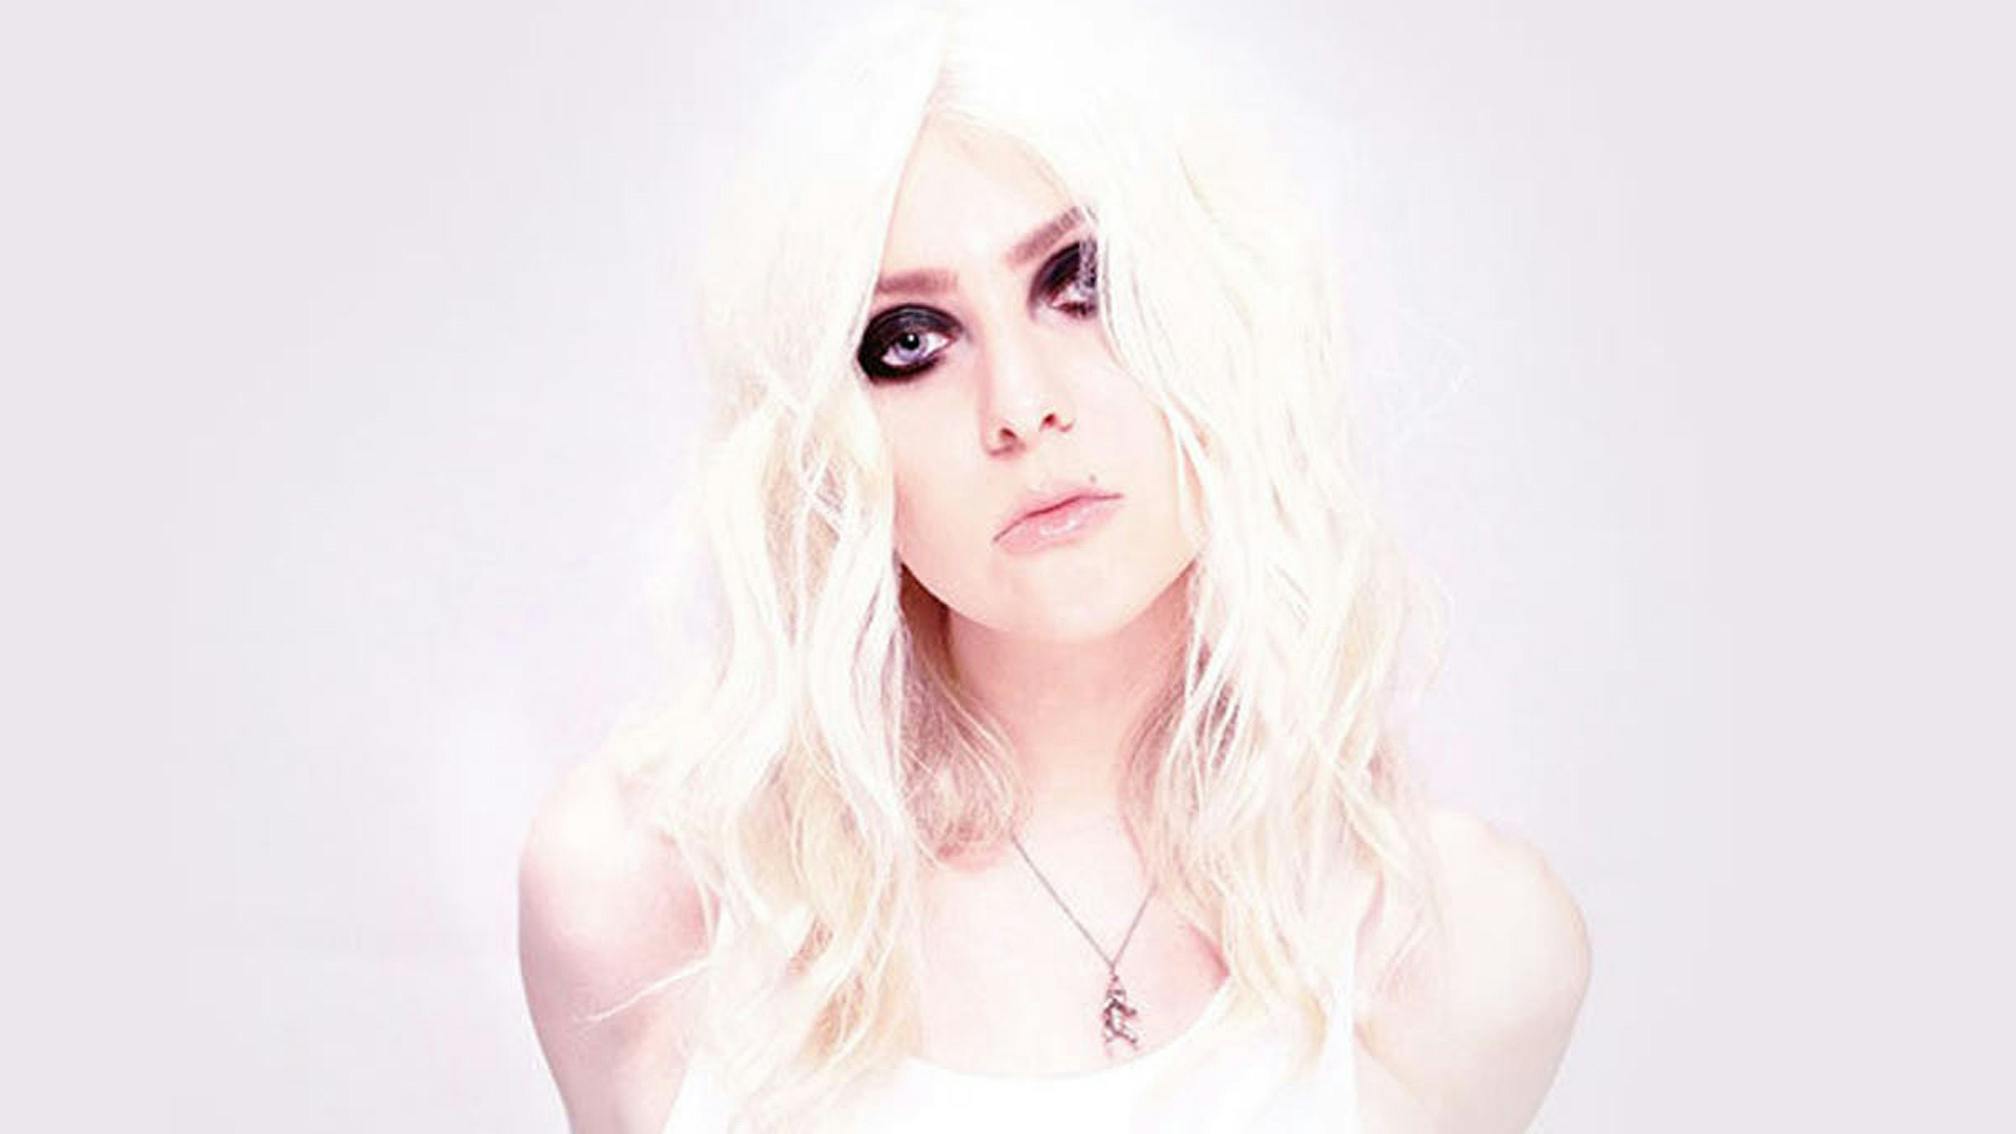 Taylor Momsen: "I Said I'd Never Act Again, But I've Gotten Older Now, And Who Knows?"